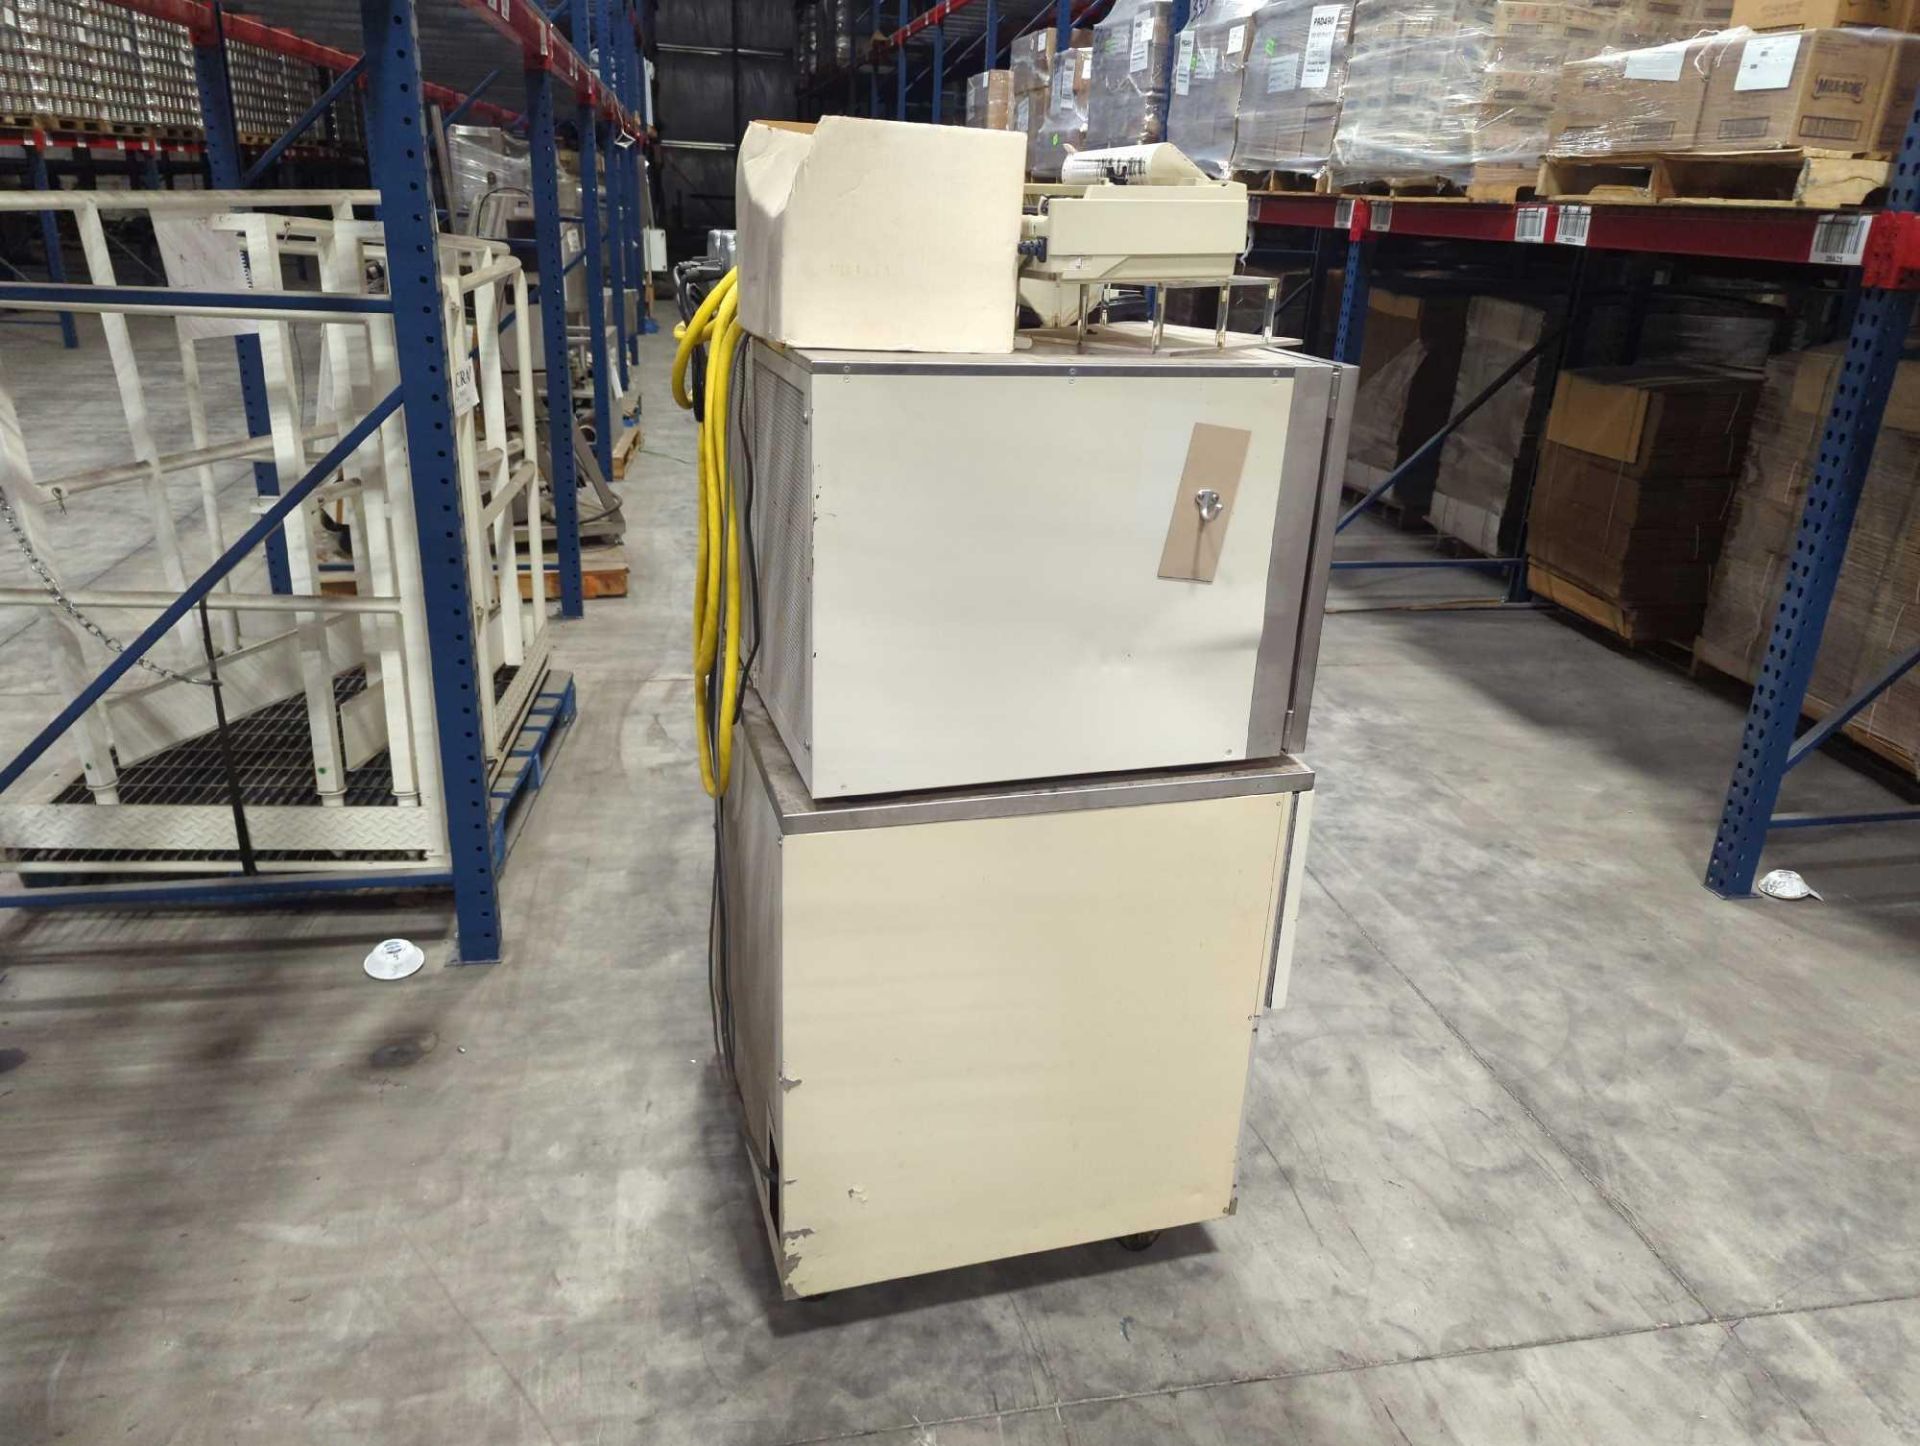 Duratop MP bulk tray dryer and corrosion resistant freeze dryer - Image 8 of 19